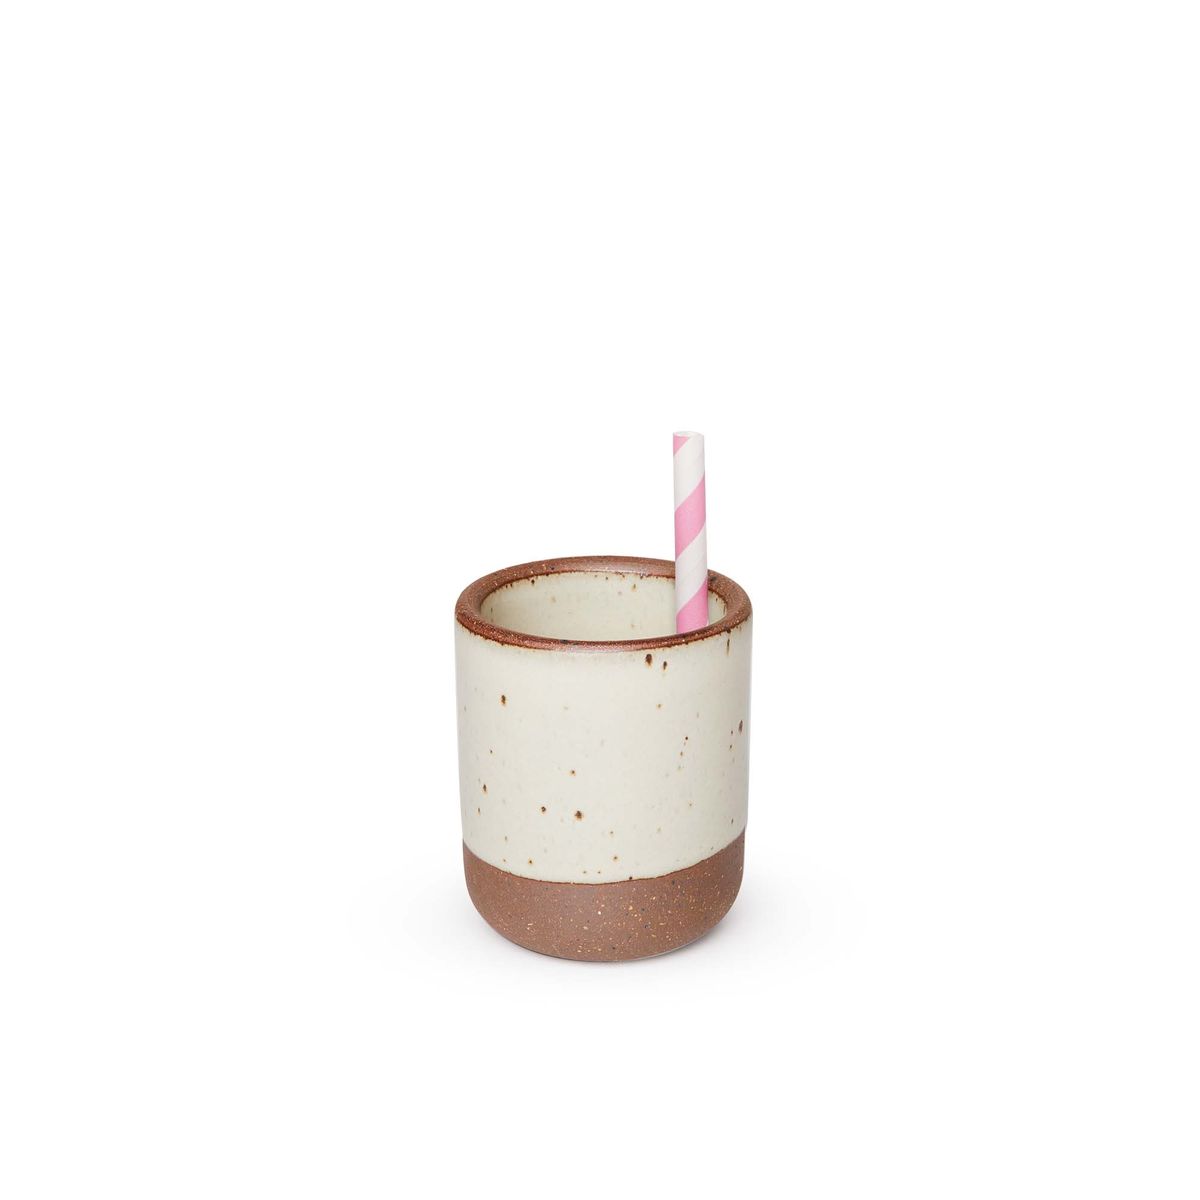 A straw sitting in a small, short ceramic mug cup in a warm, tan-toned, off-white color featuring iron speckles and unglazed rim and bottom base.